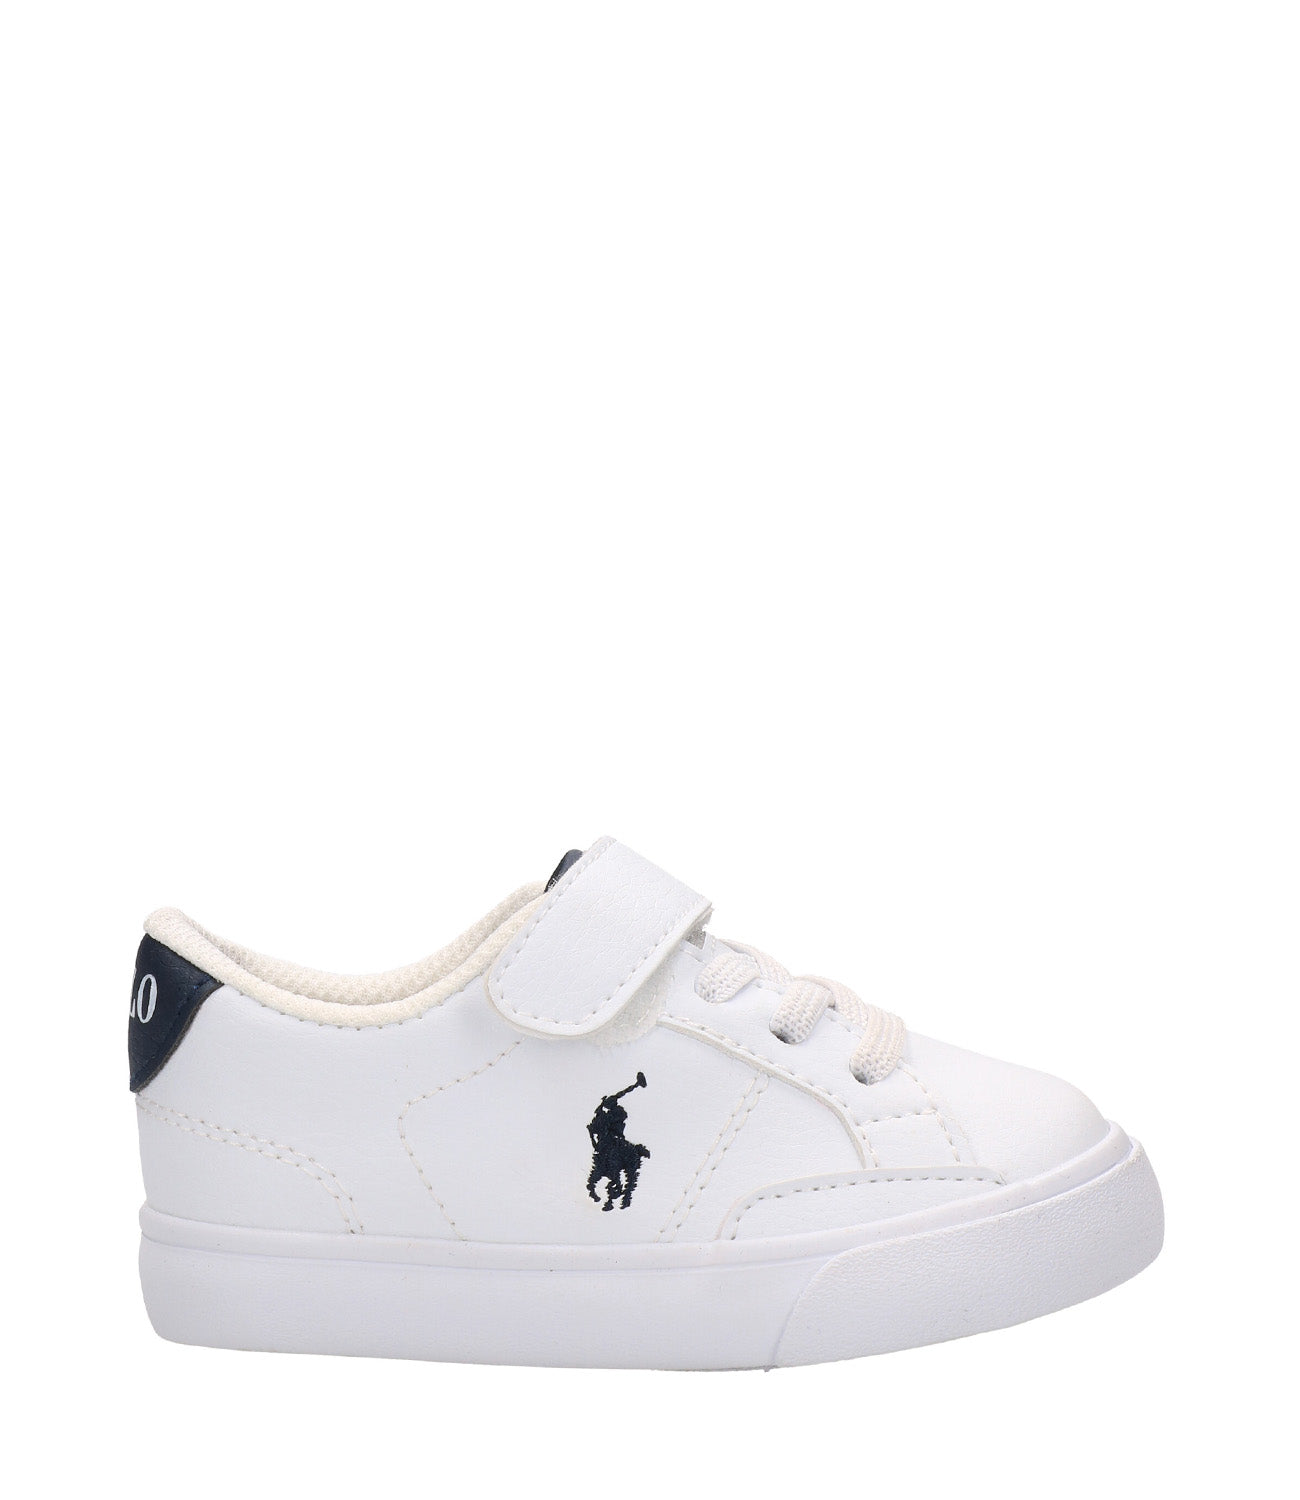 Ralph Lauren Childrenswear | Sneakers White and Navy Blue